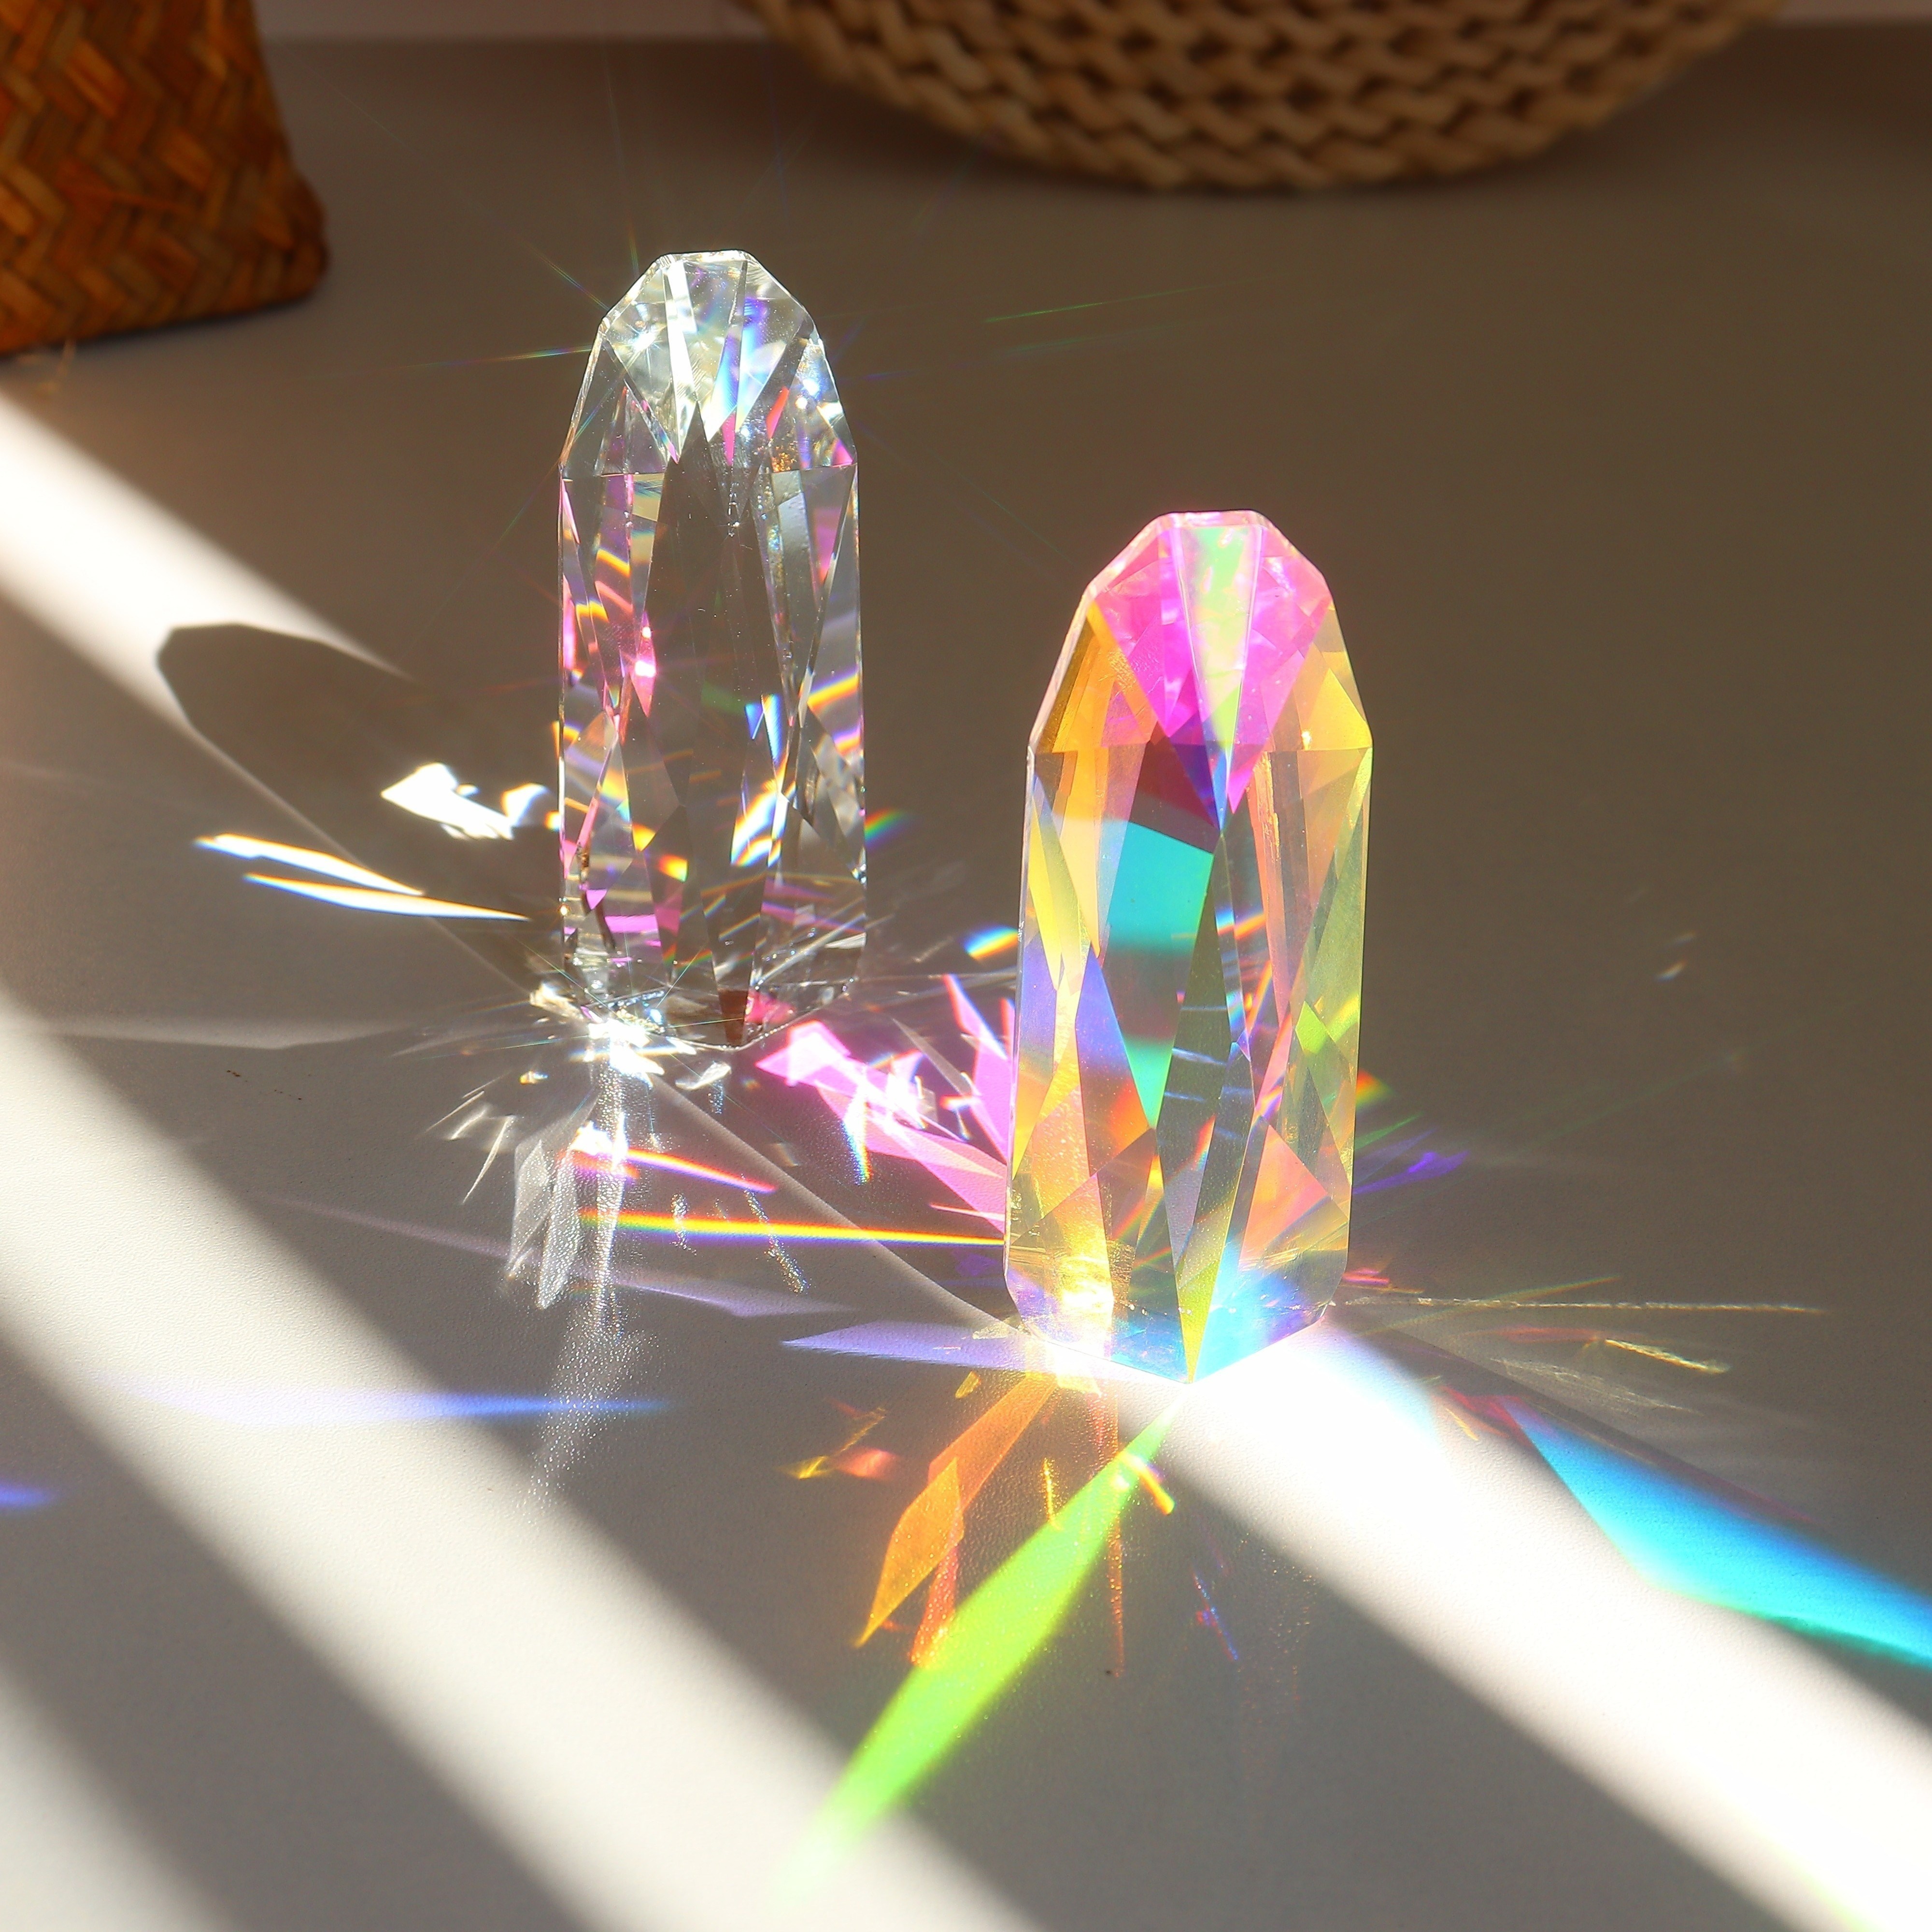 

1pc/2pcs Rainbow Crystal Prism Ornament Brings Positive Energy To Your Home.